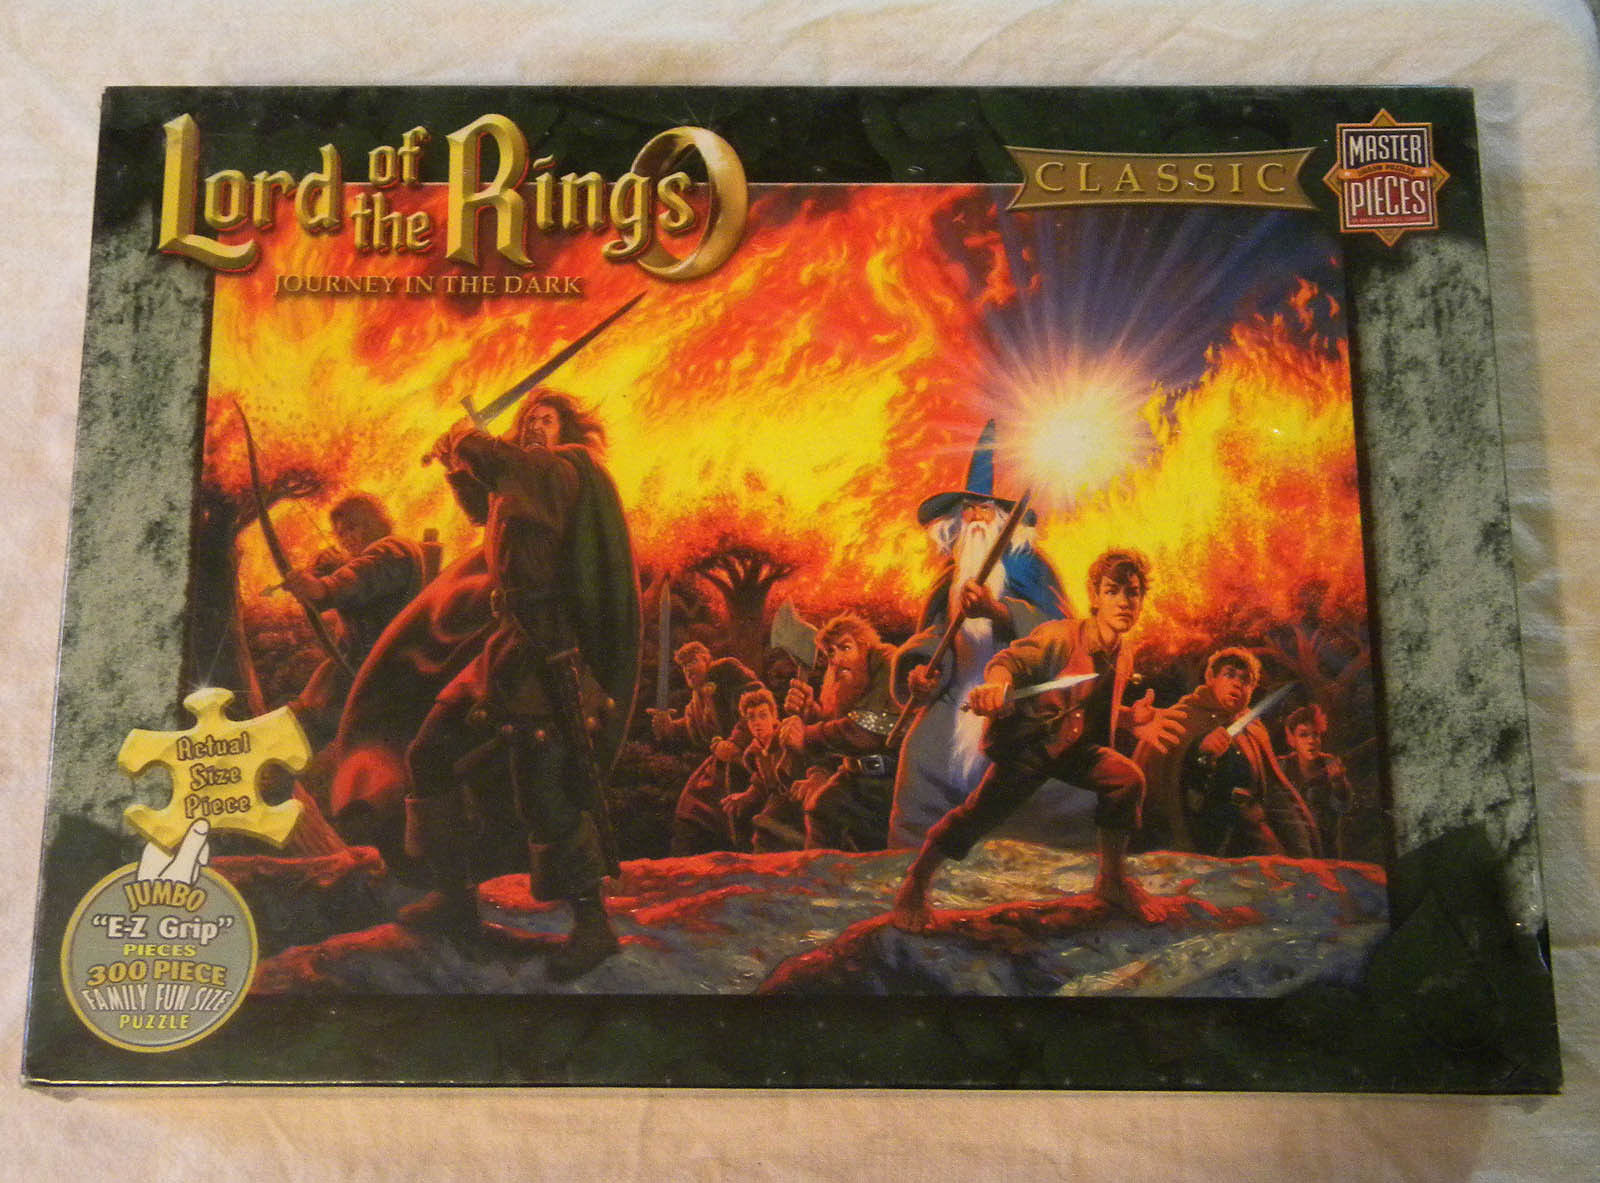 Primary image for Lord of the Rings JOURNEY IN THE DARK Classic Master Pieces 300-pc Puzzle new